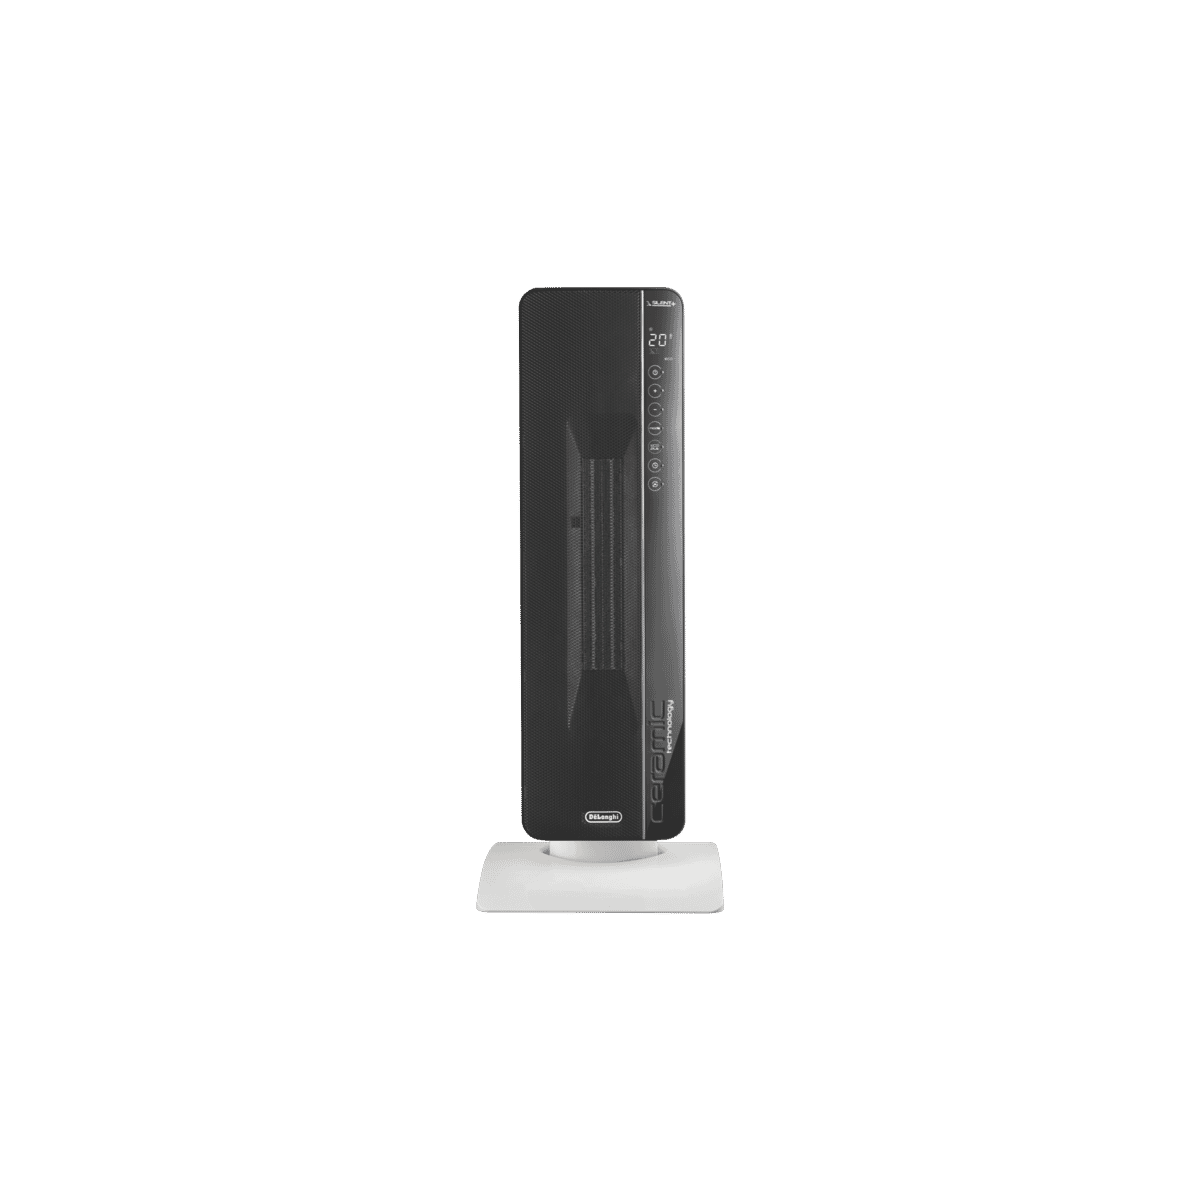 Delonghi Tch8993er 2400w Electronic Ceramic Tower Heater At The Good Guys